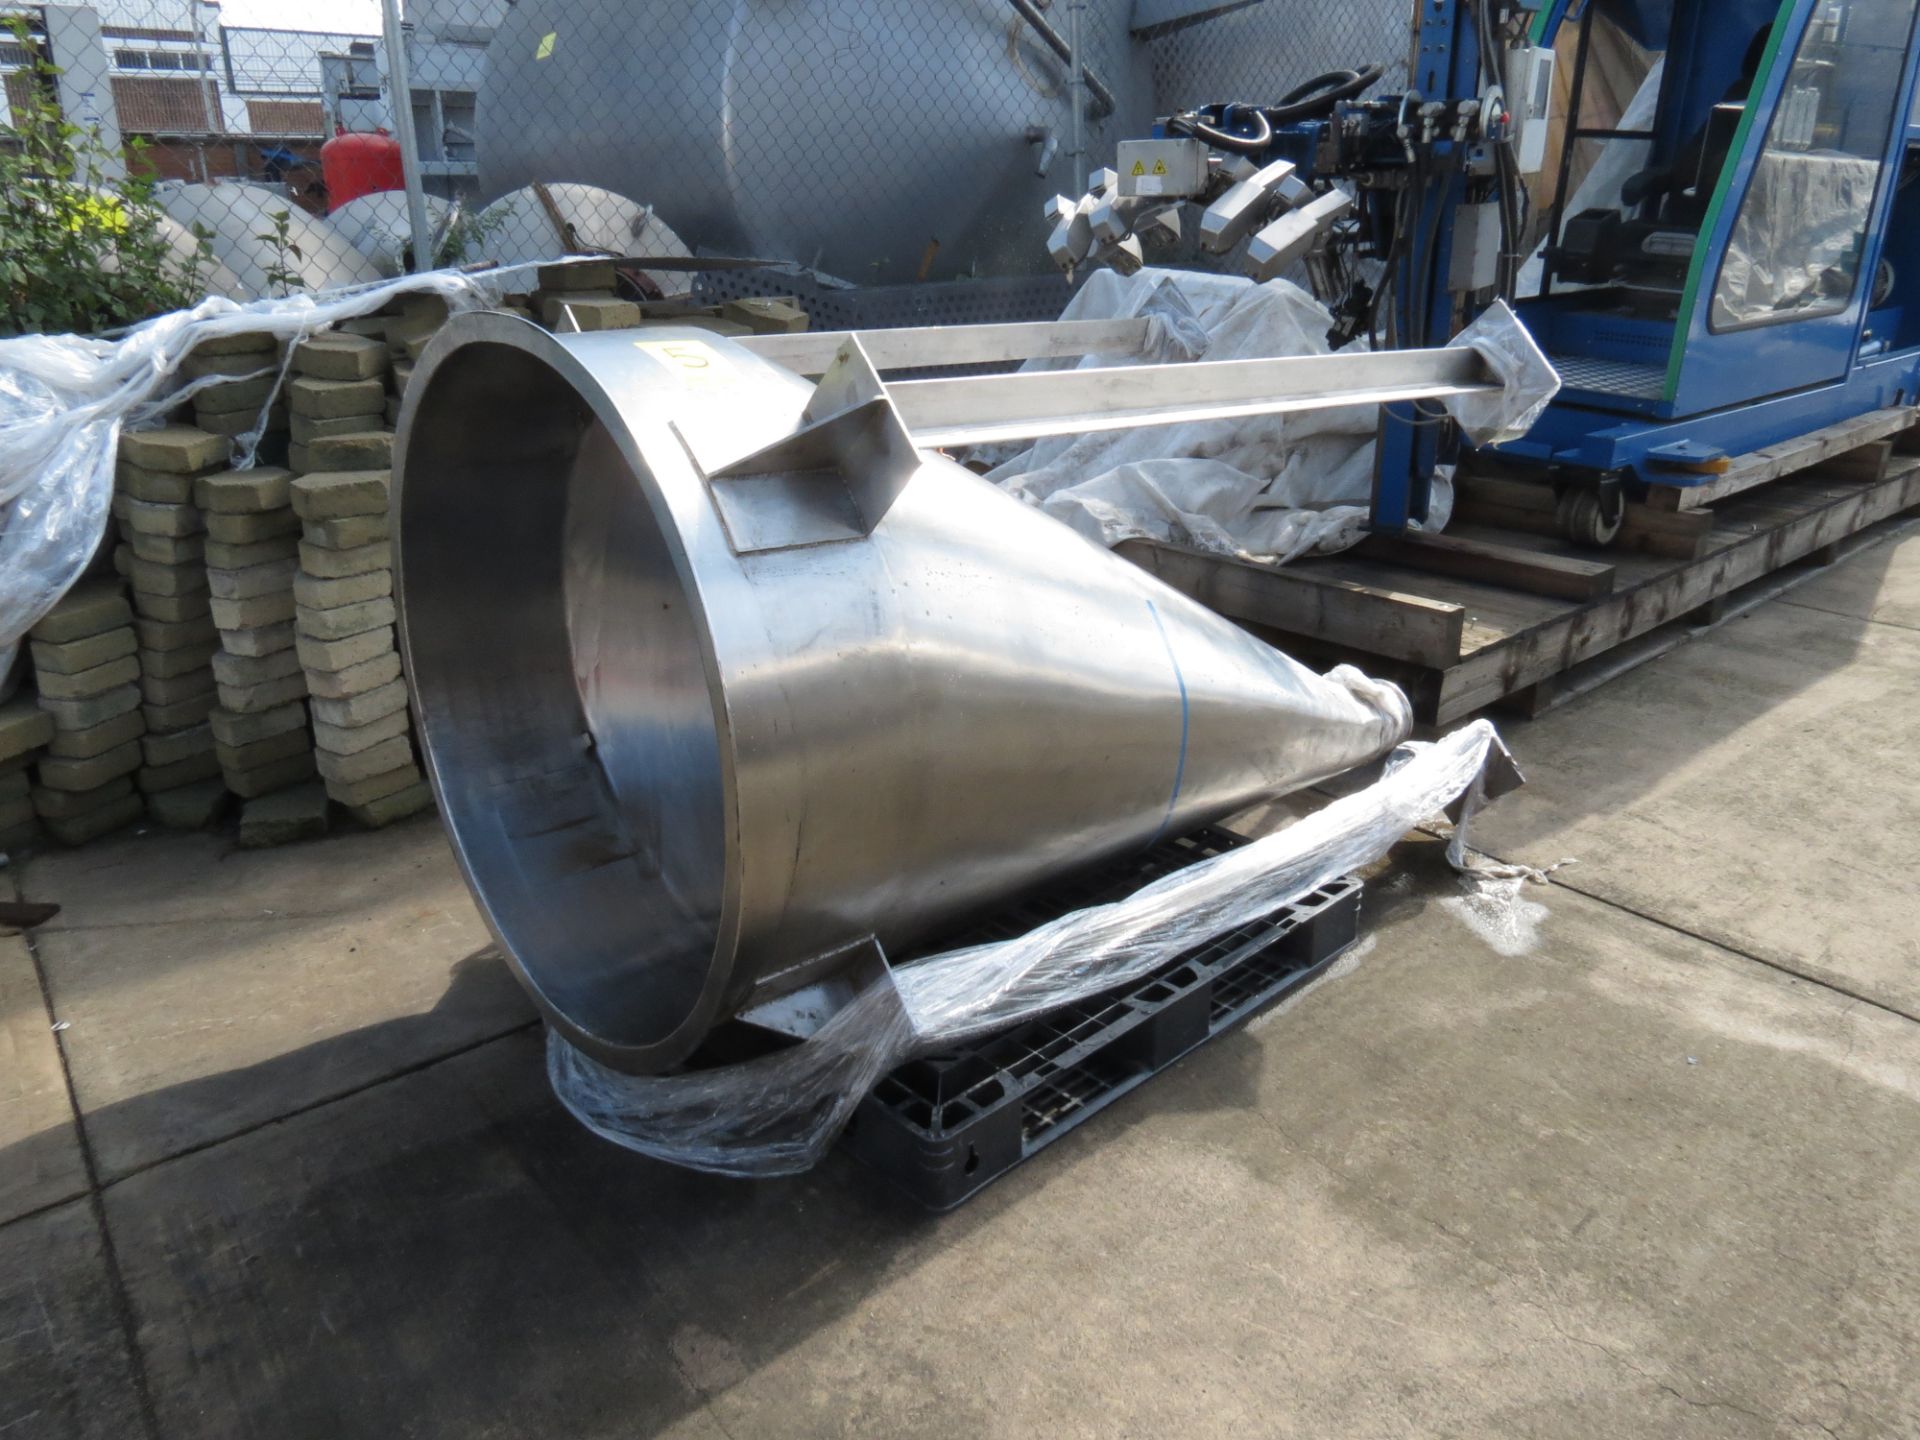 S/S Vibratory Hopper for Bulk Bag Filling of Powders, Includes Screens - Image 4 of 18